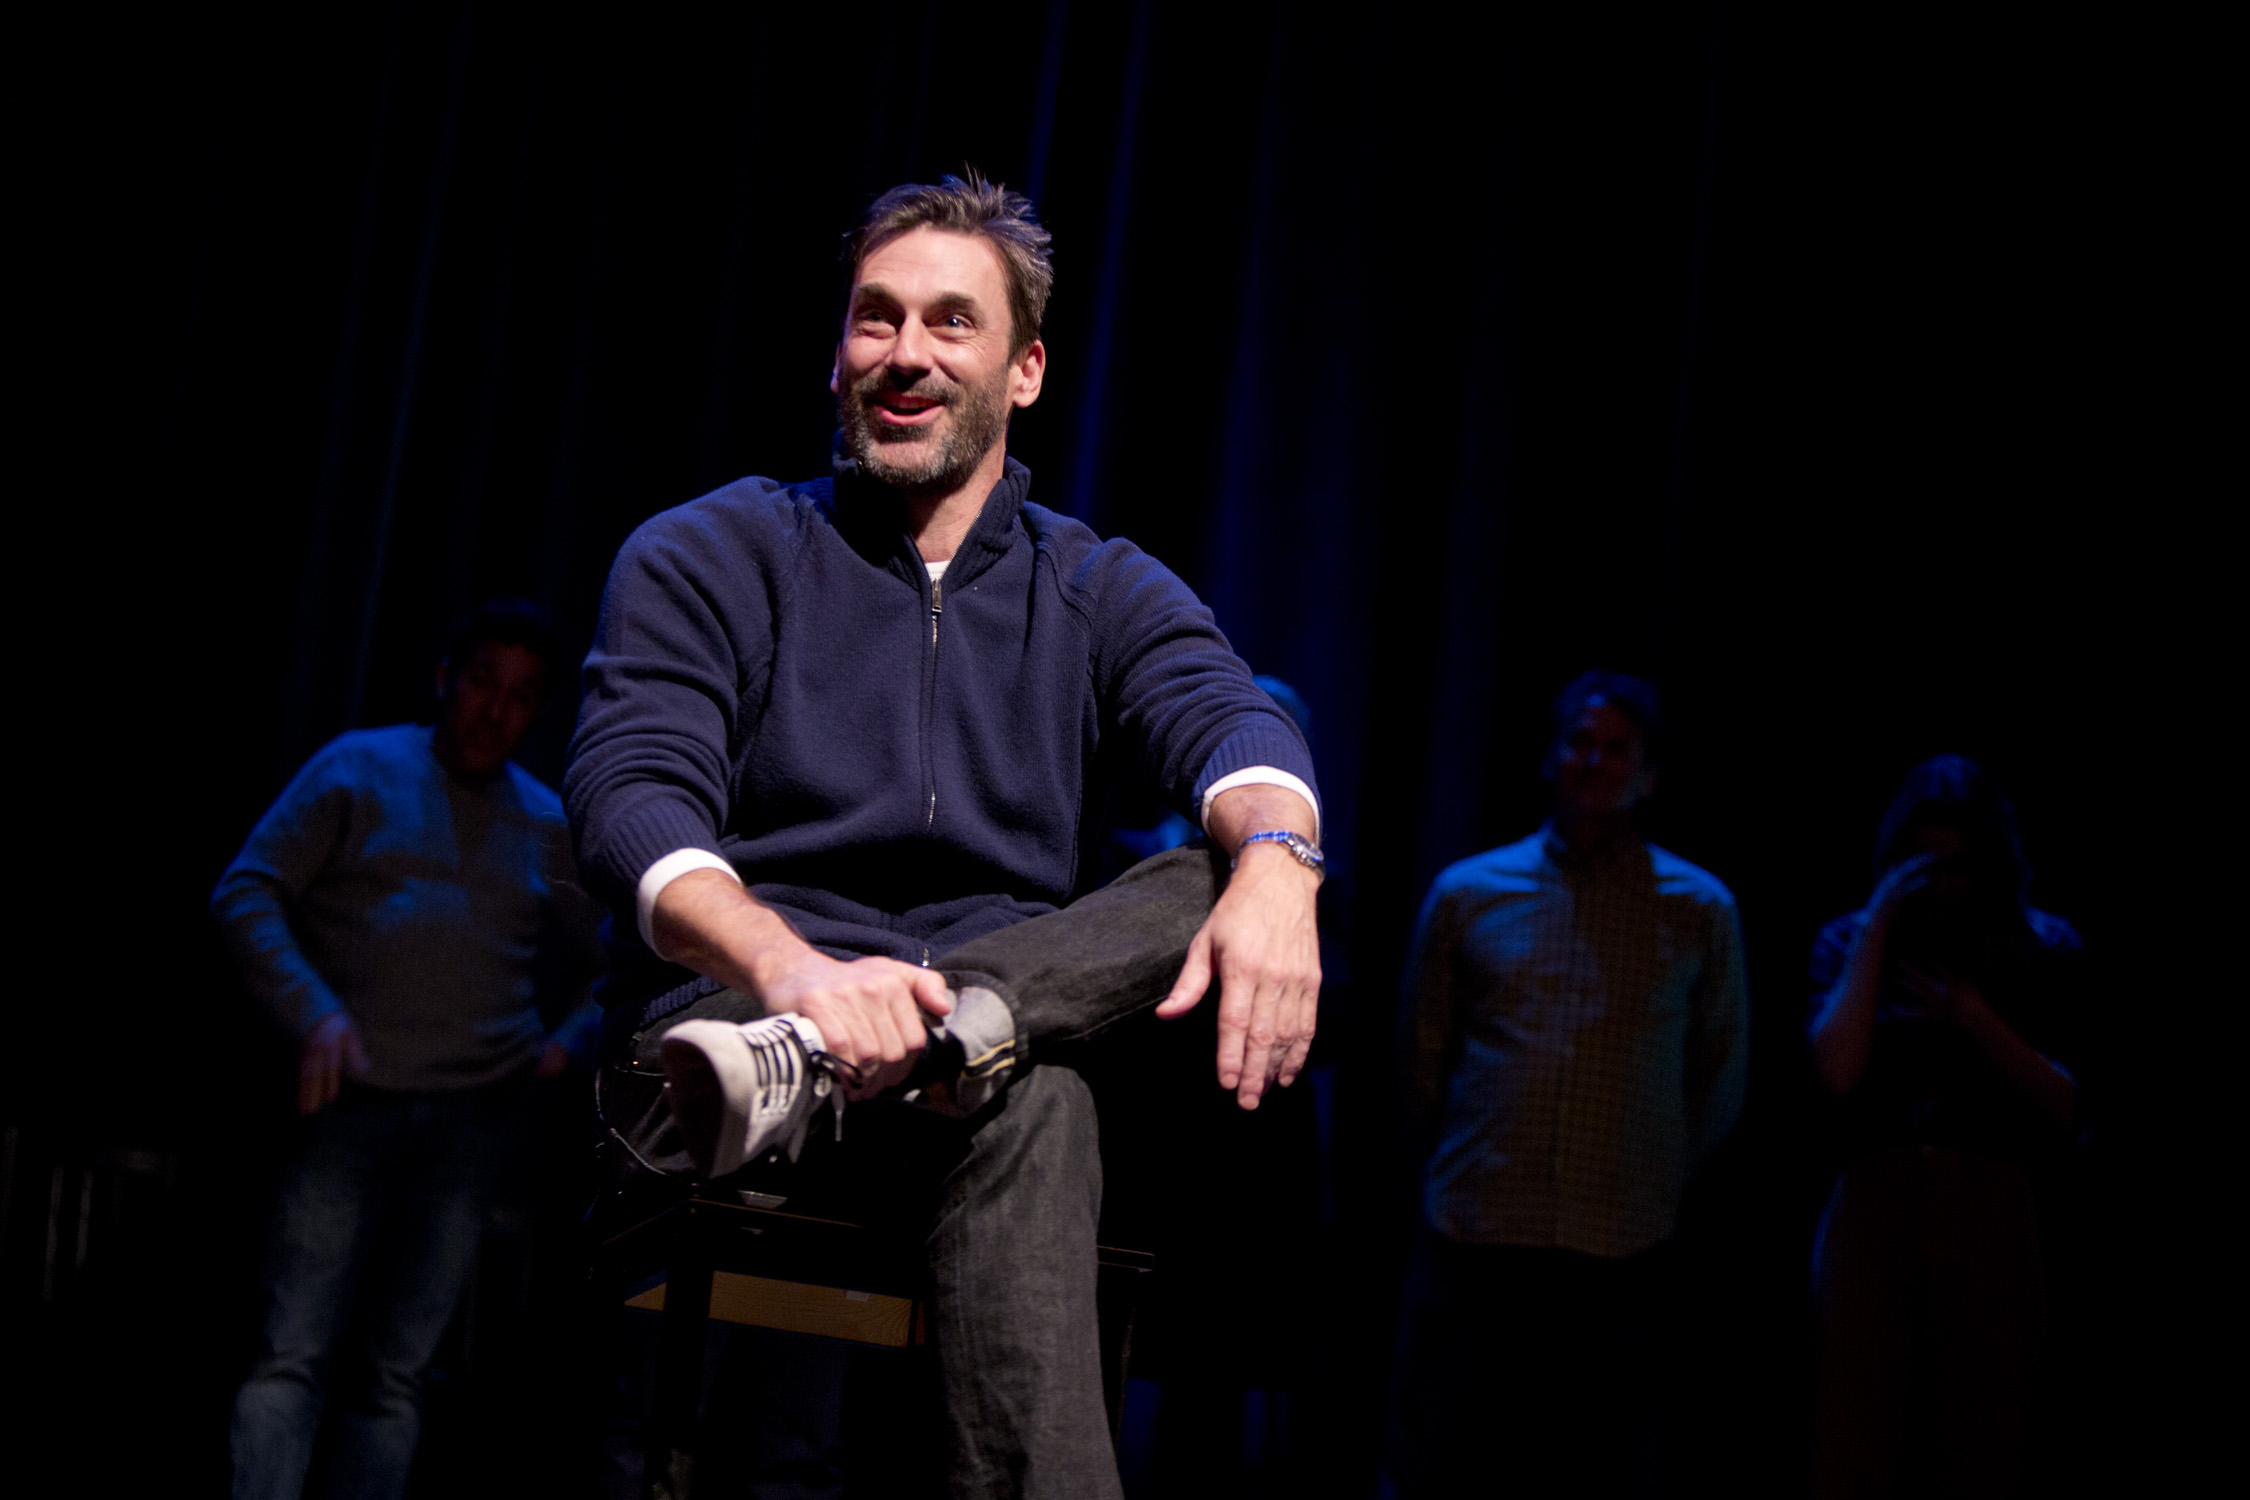 Jon Hamm at Theme Park Improv 2017 at SF Sketchfest. Photo by Tommy Lau.